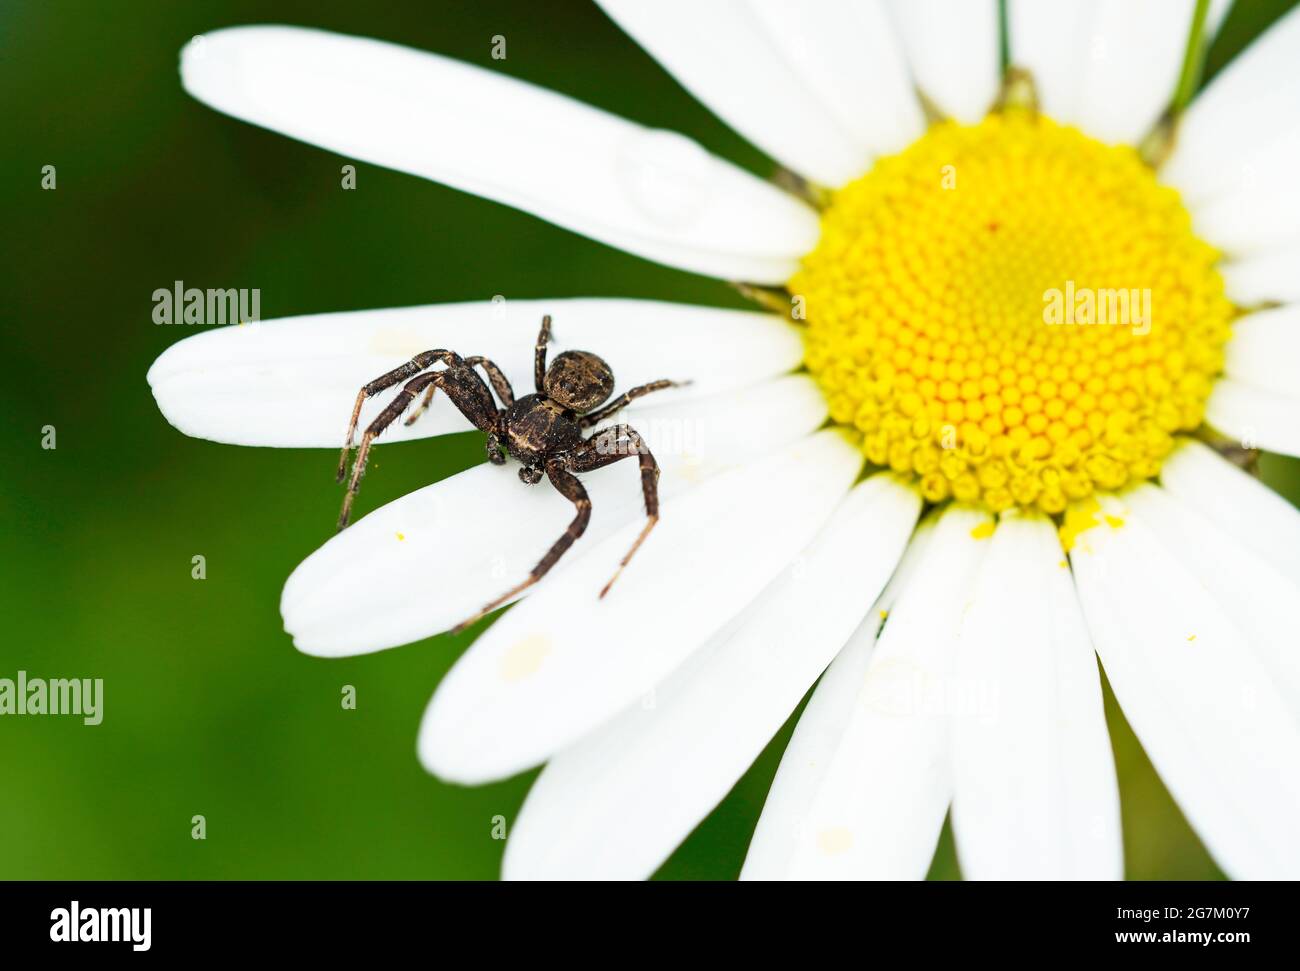 Crab spider on white petals. Spider close up on a flower in natural setting. Green background. Thomisidae. Arachnida. Stock Photo